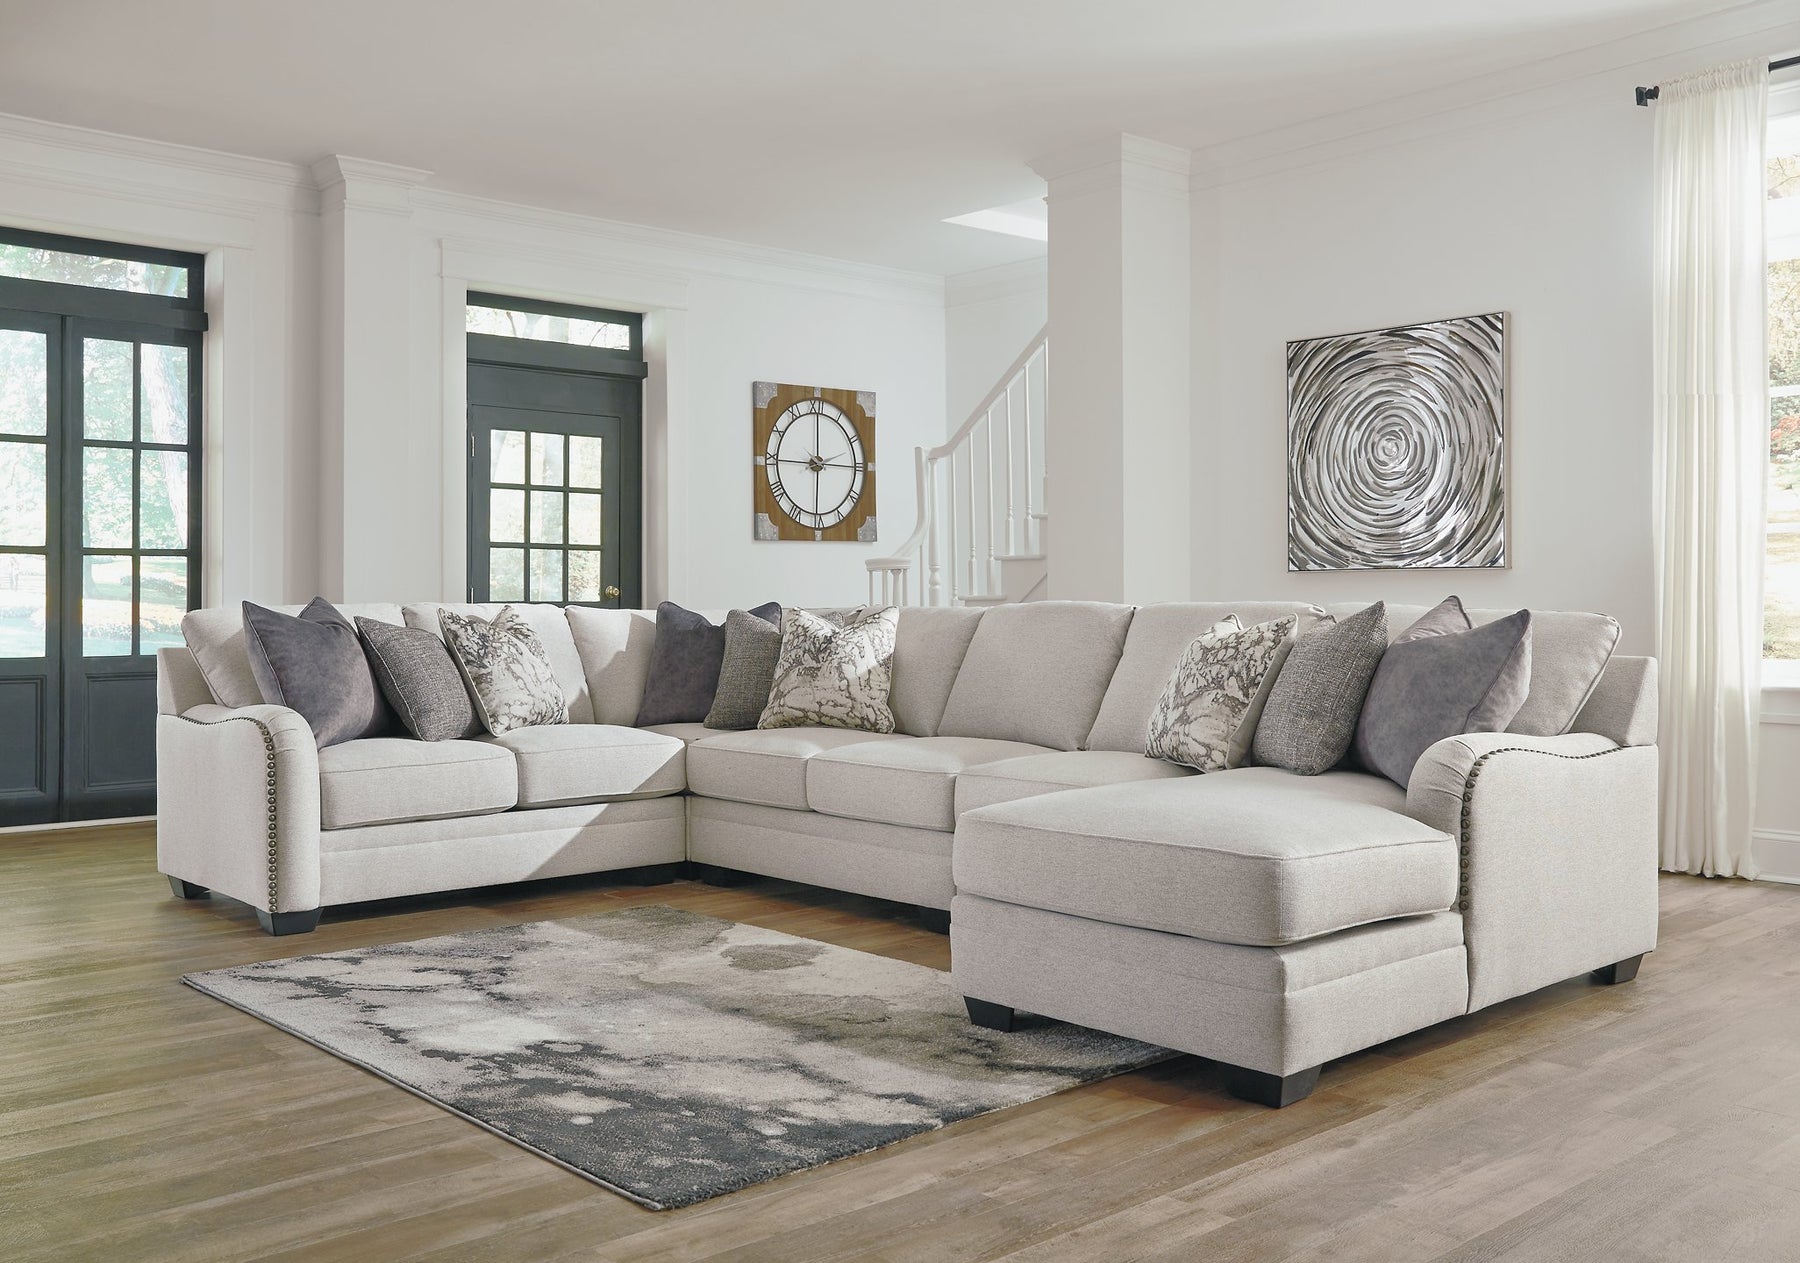 Dellara Sectional with Chaise - Half Price Furniture